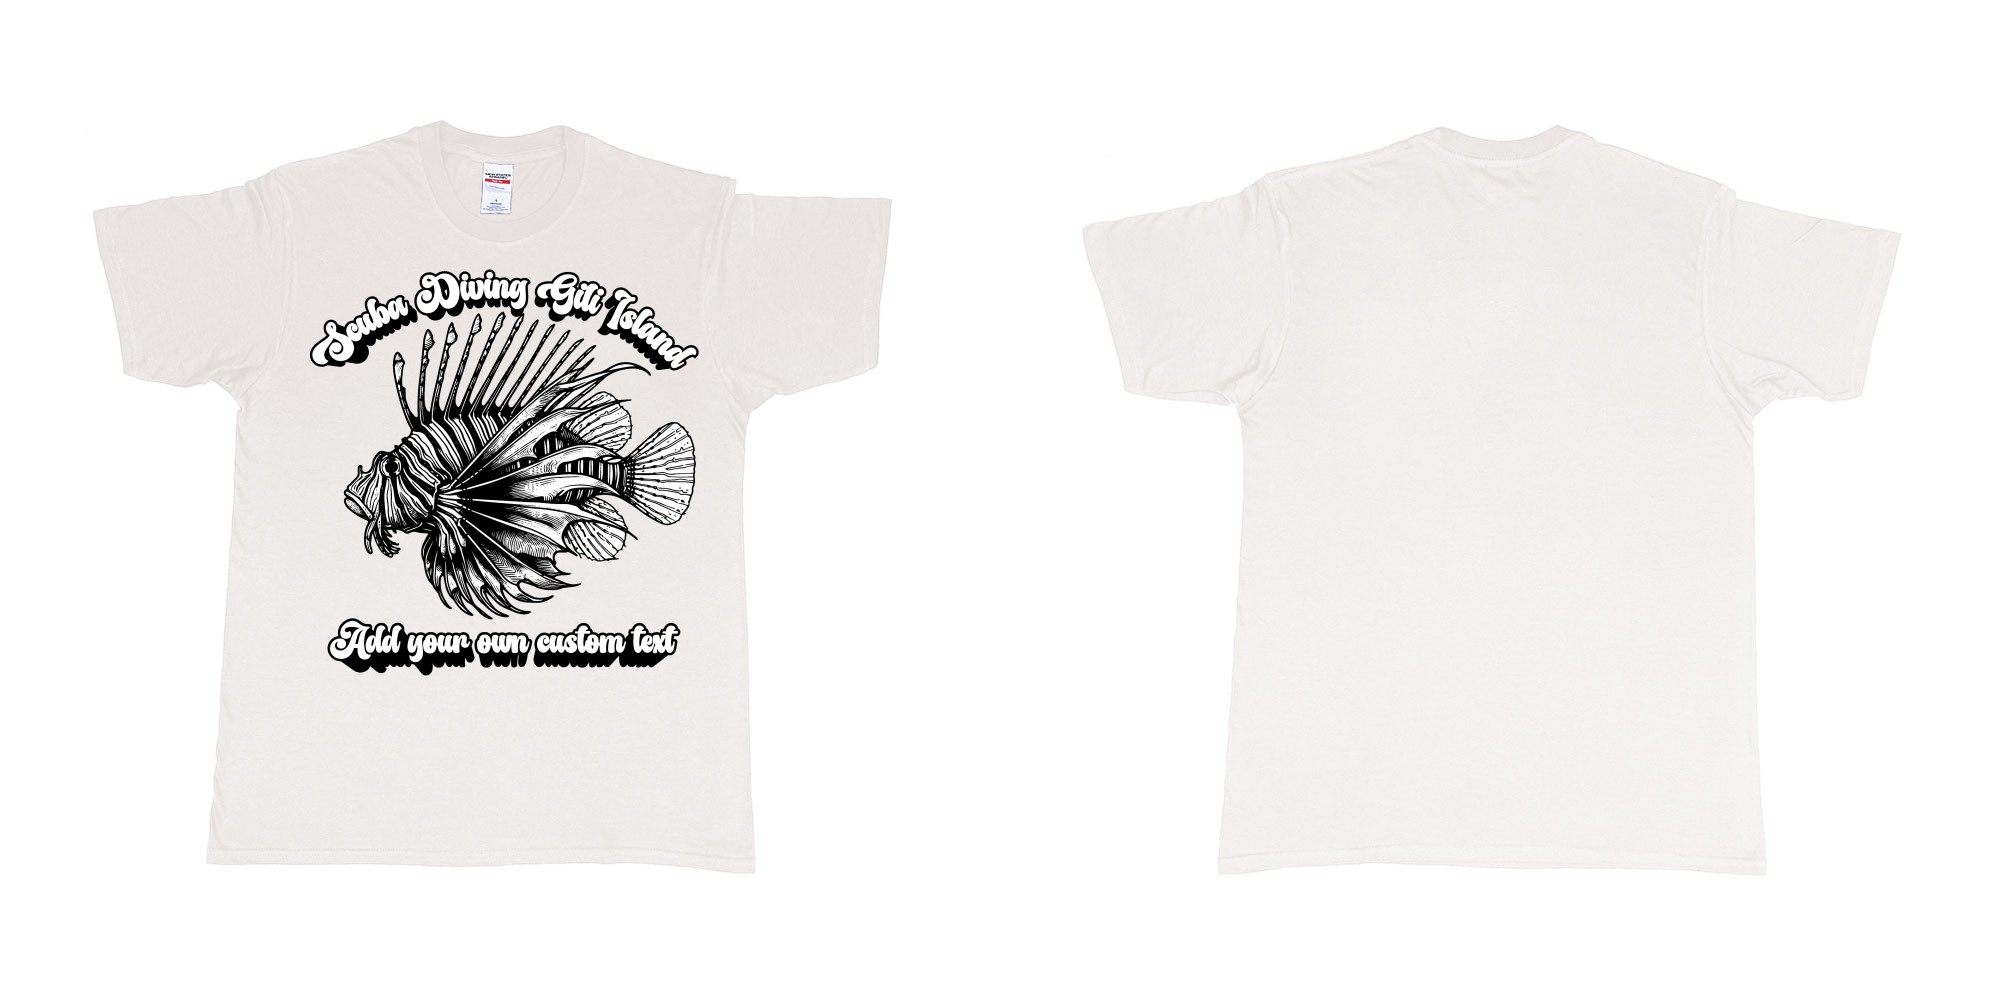 Custom tshirt design lion fish scuba diving gili islands custom print in fabric color white choice your own text made in Bali by The Pirate Way